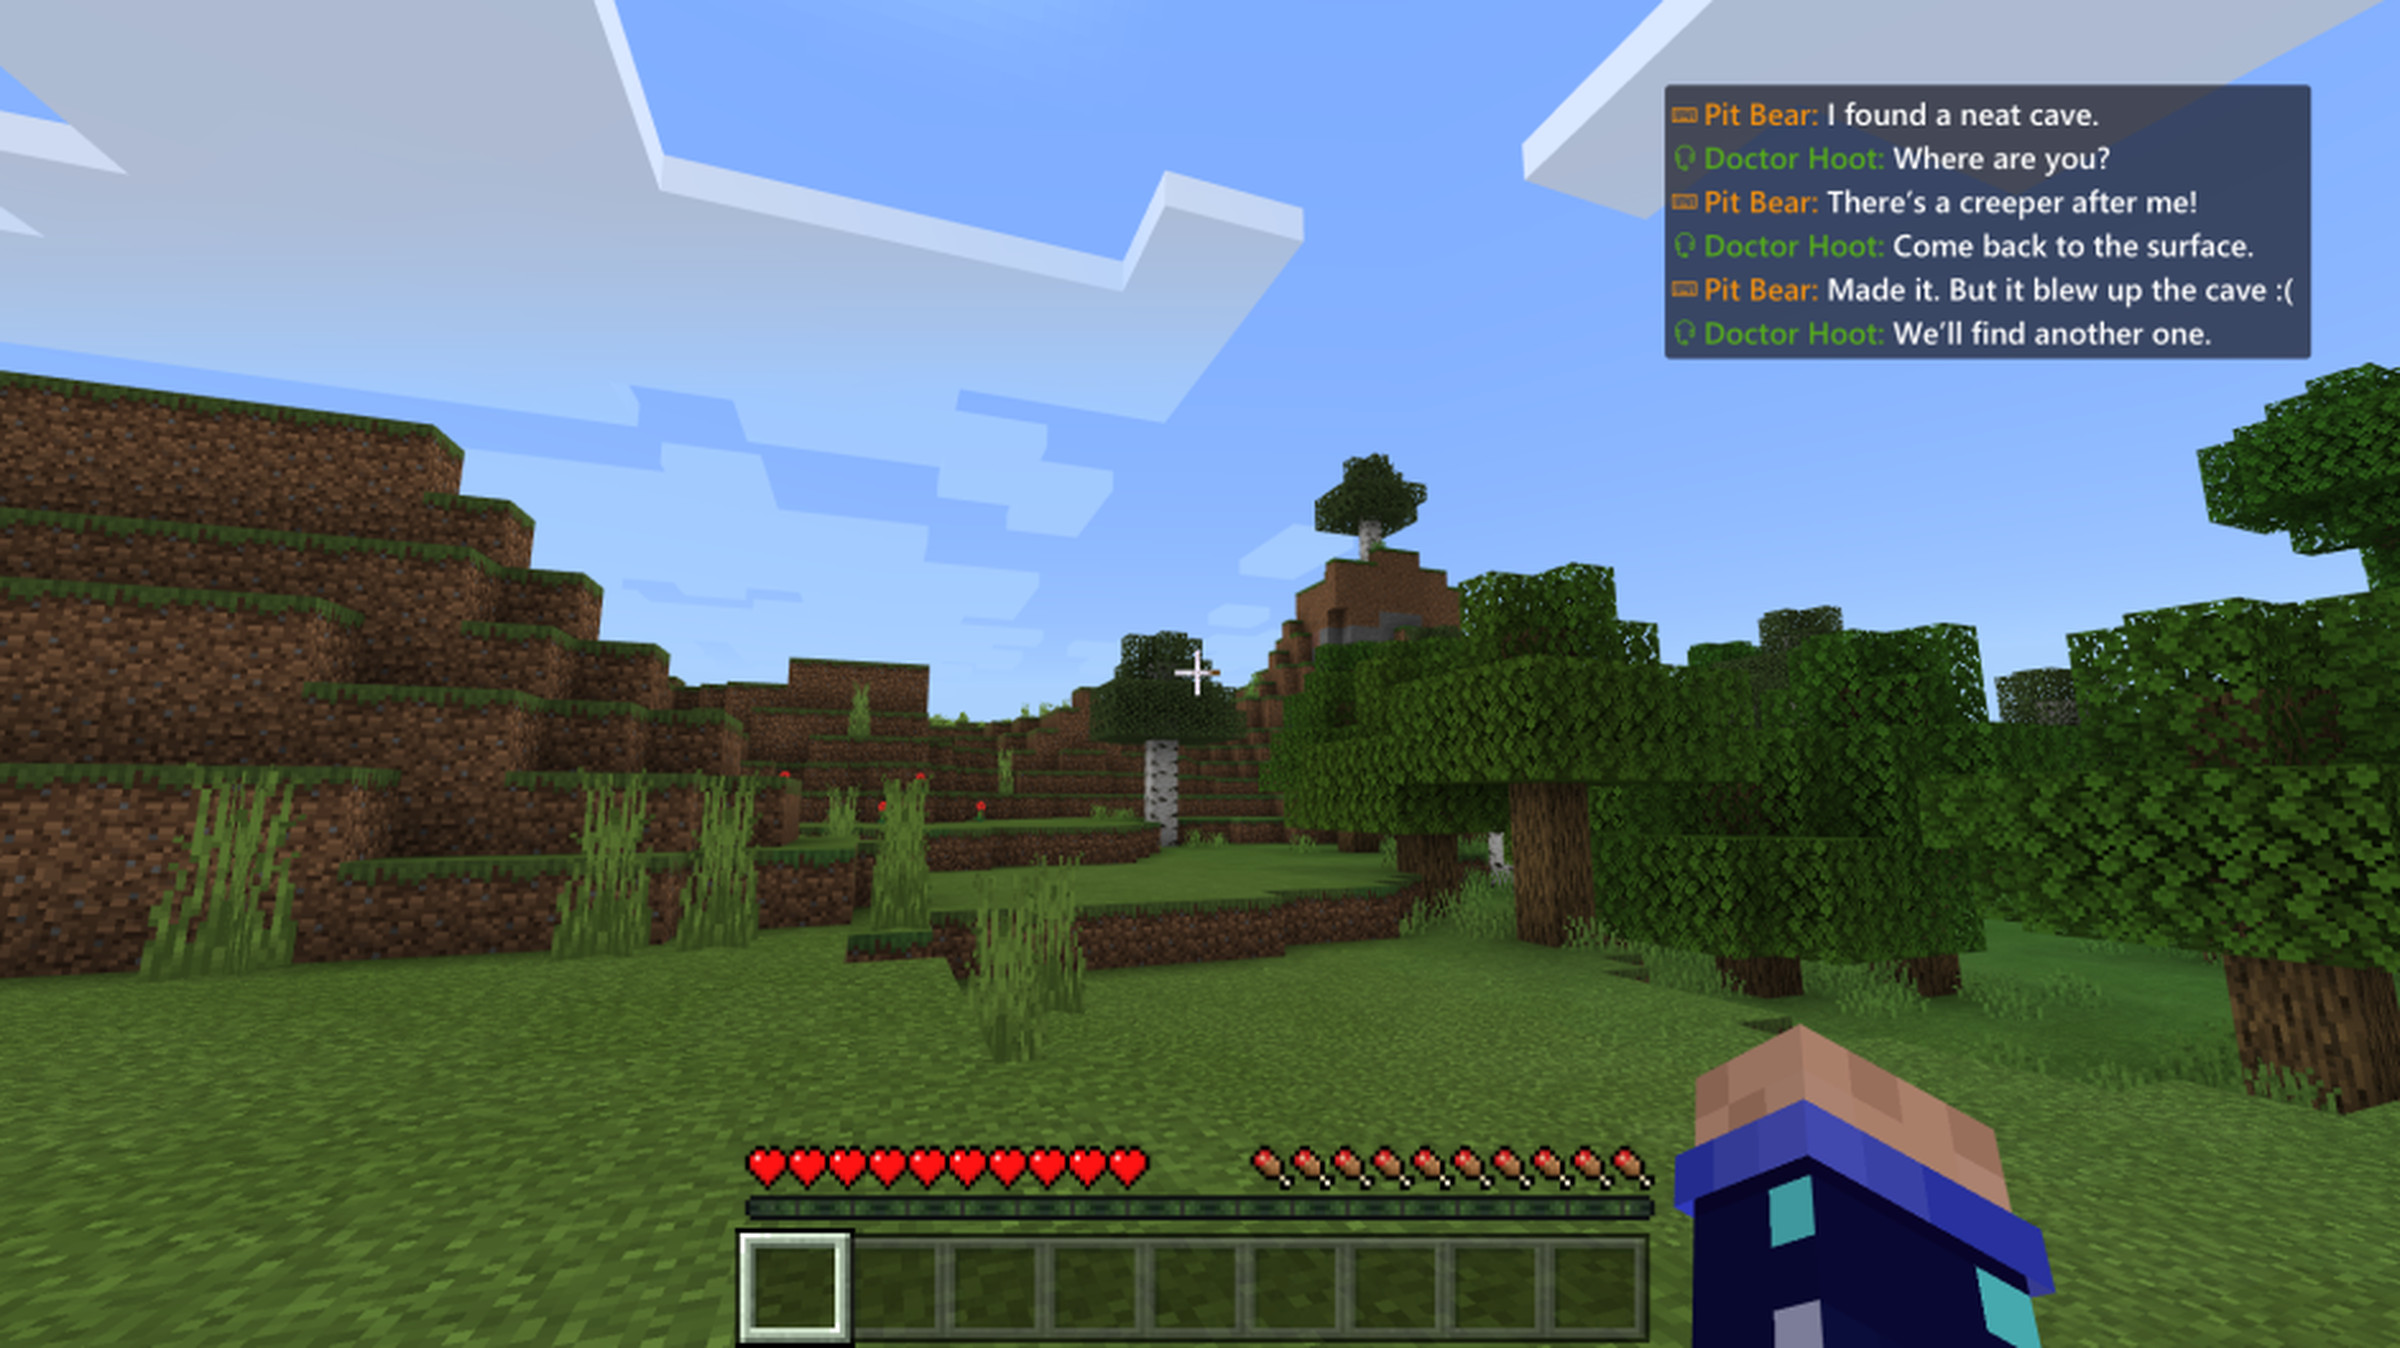 The window in the top right shows transcribed text from voice chat.